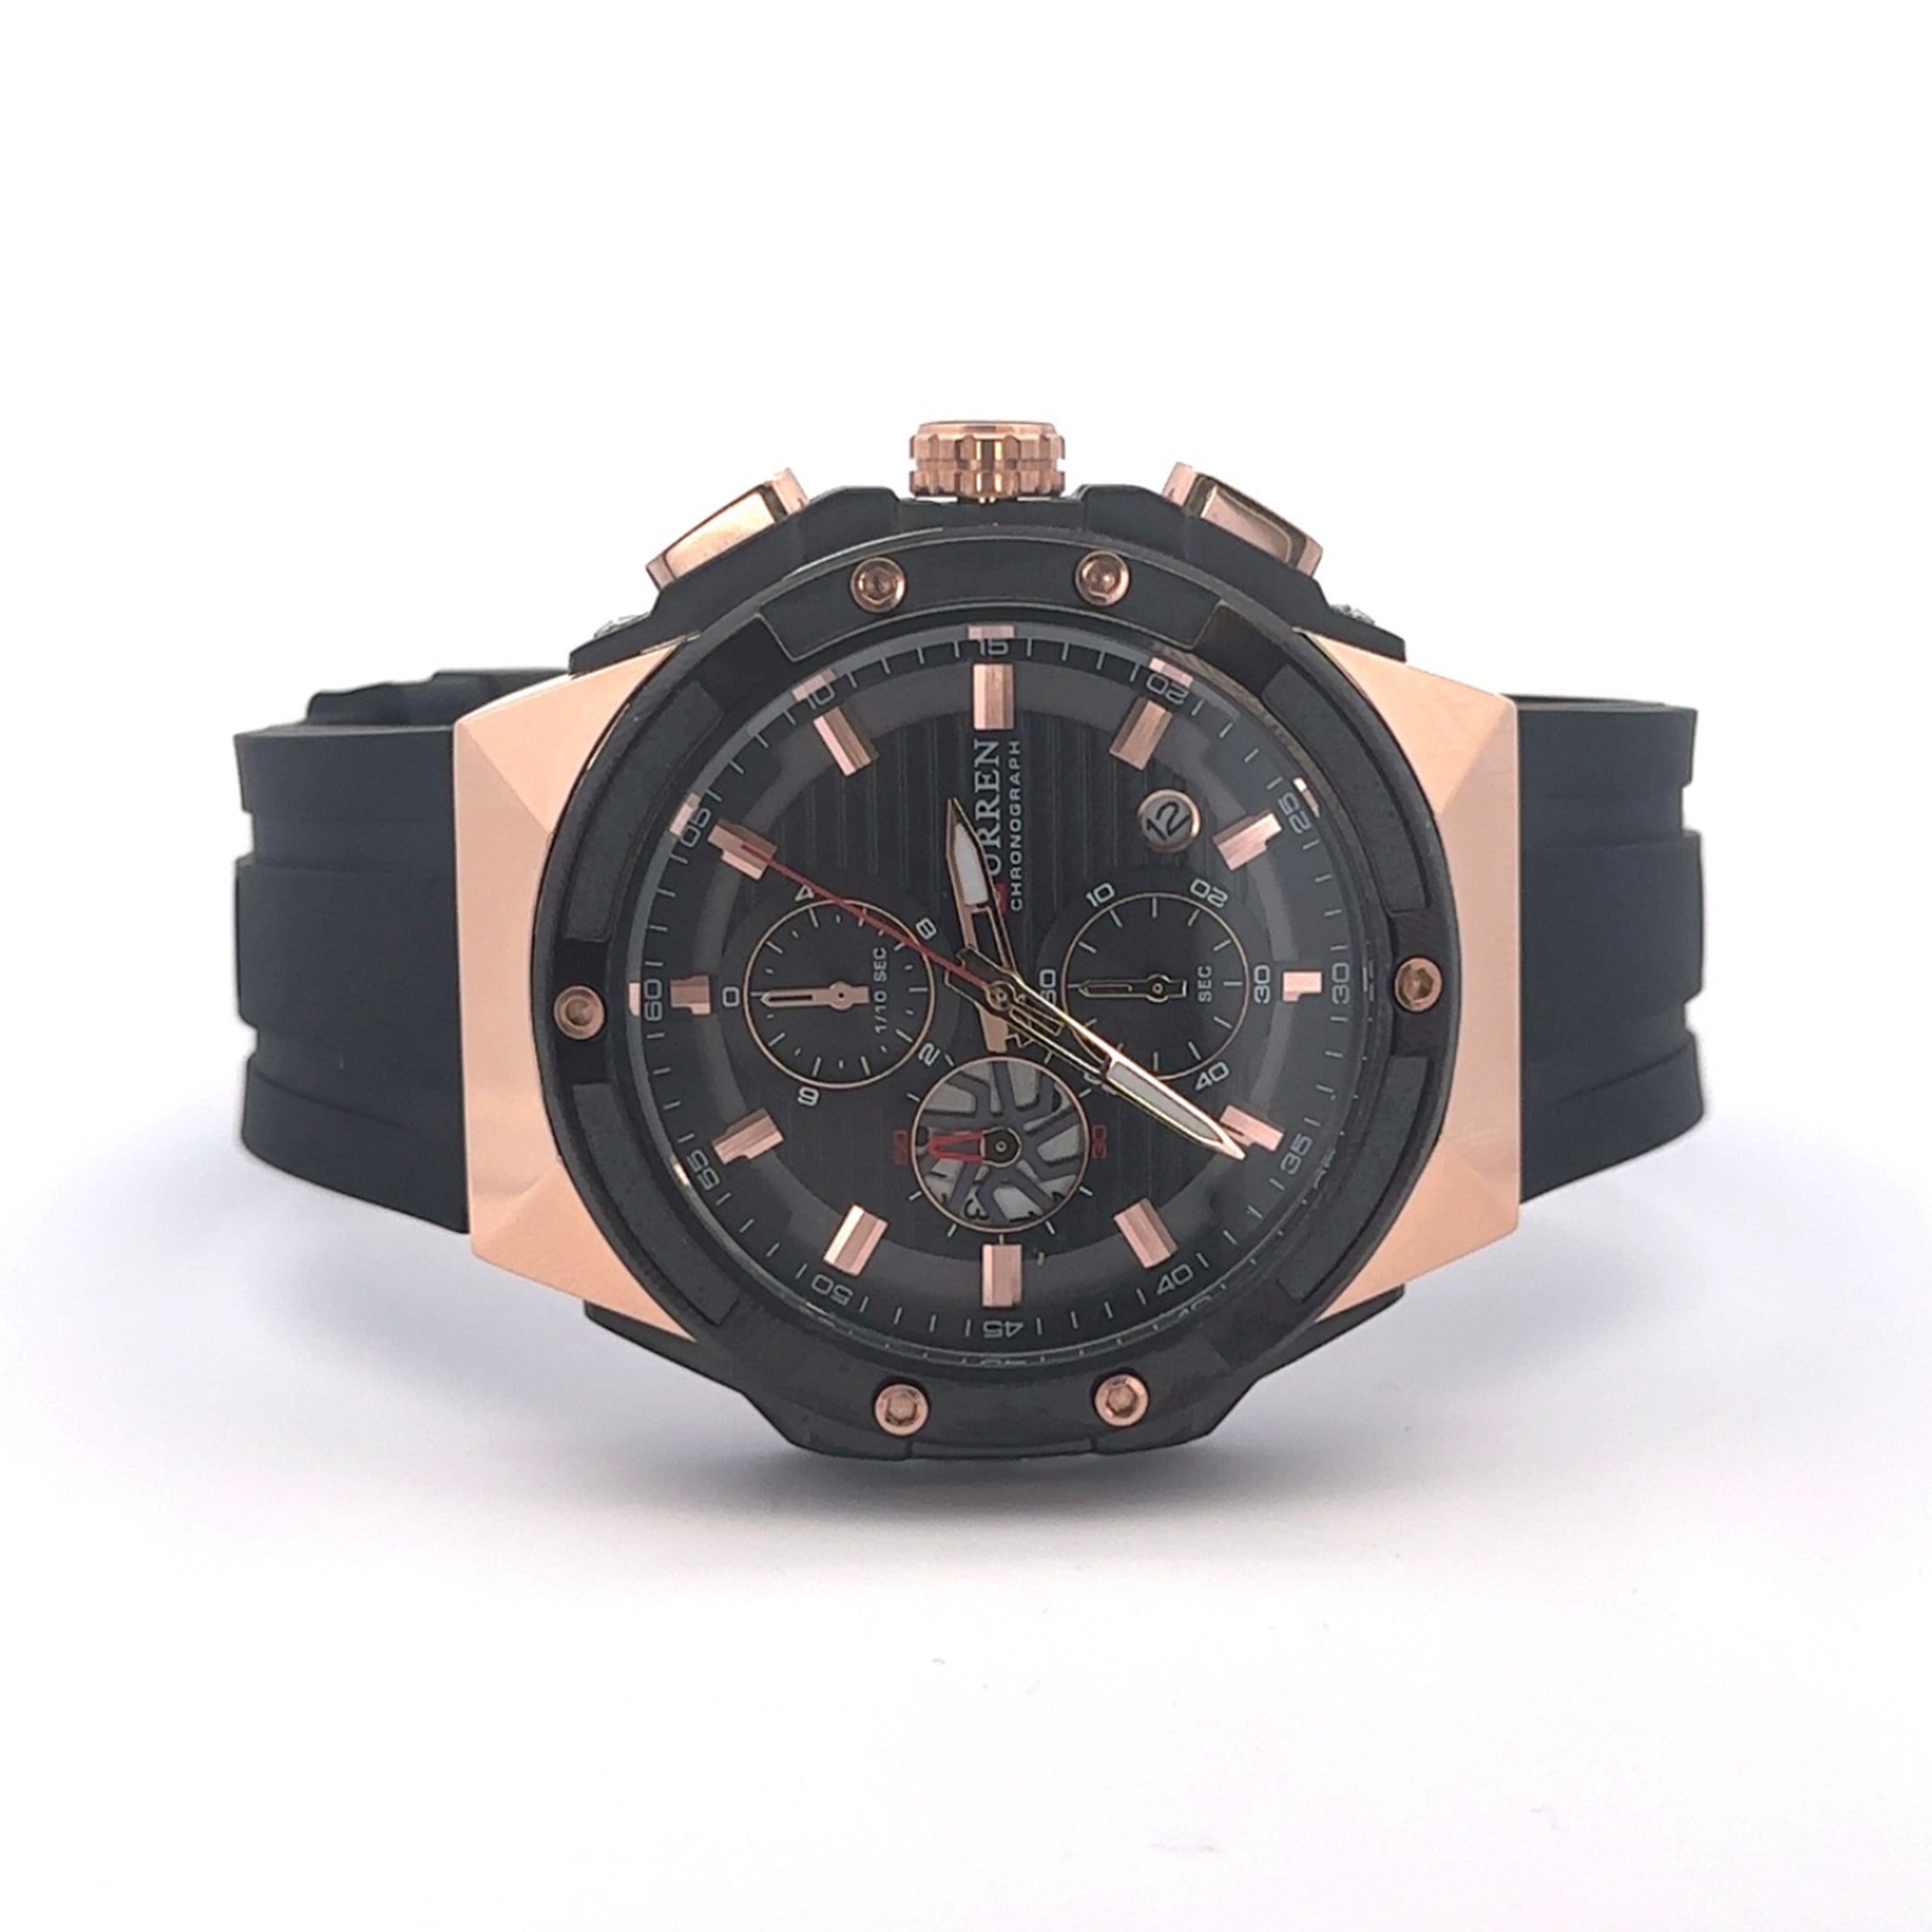 VERVA CURREN BLACK LEATHER ICED OUT WATCH I 541663